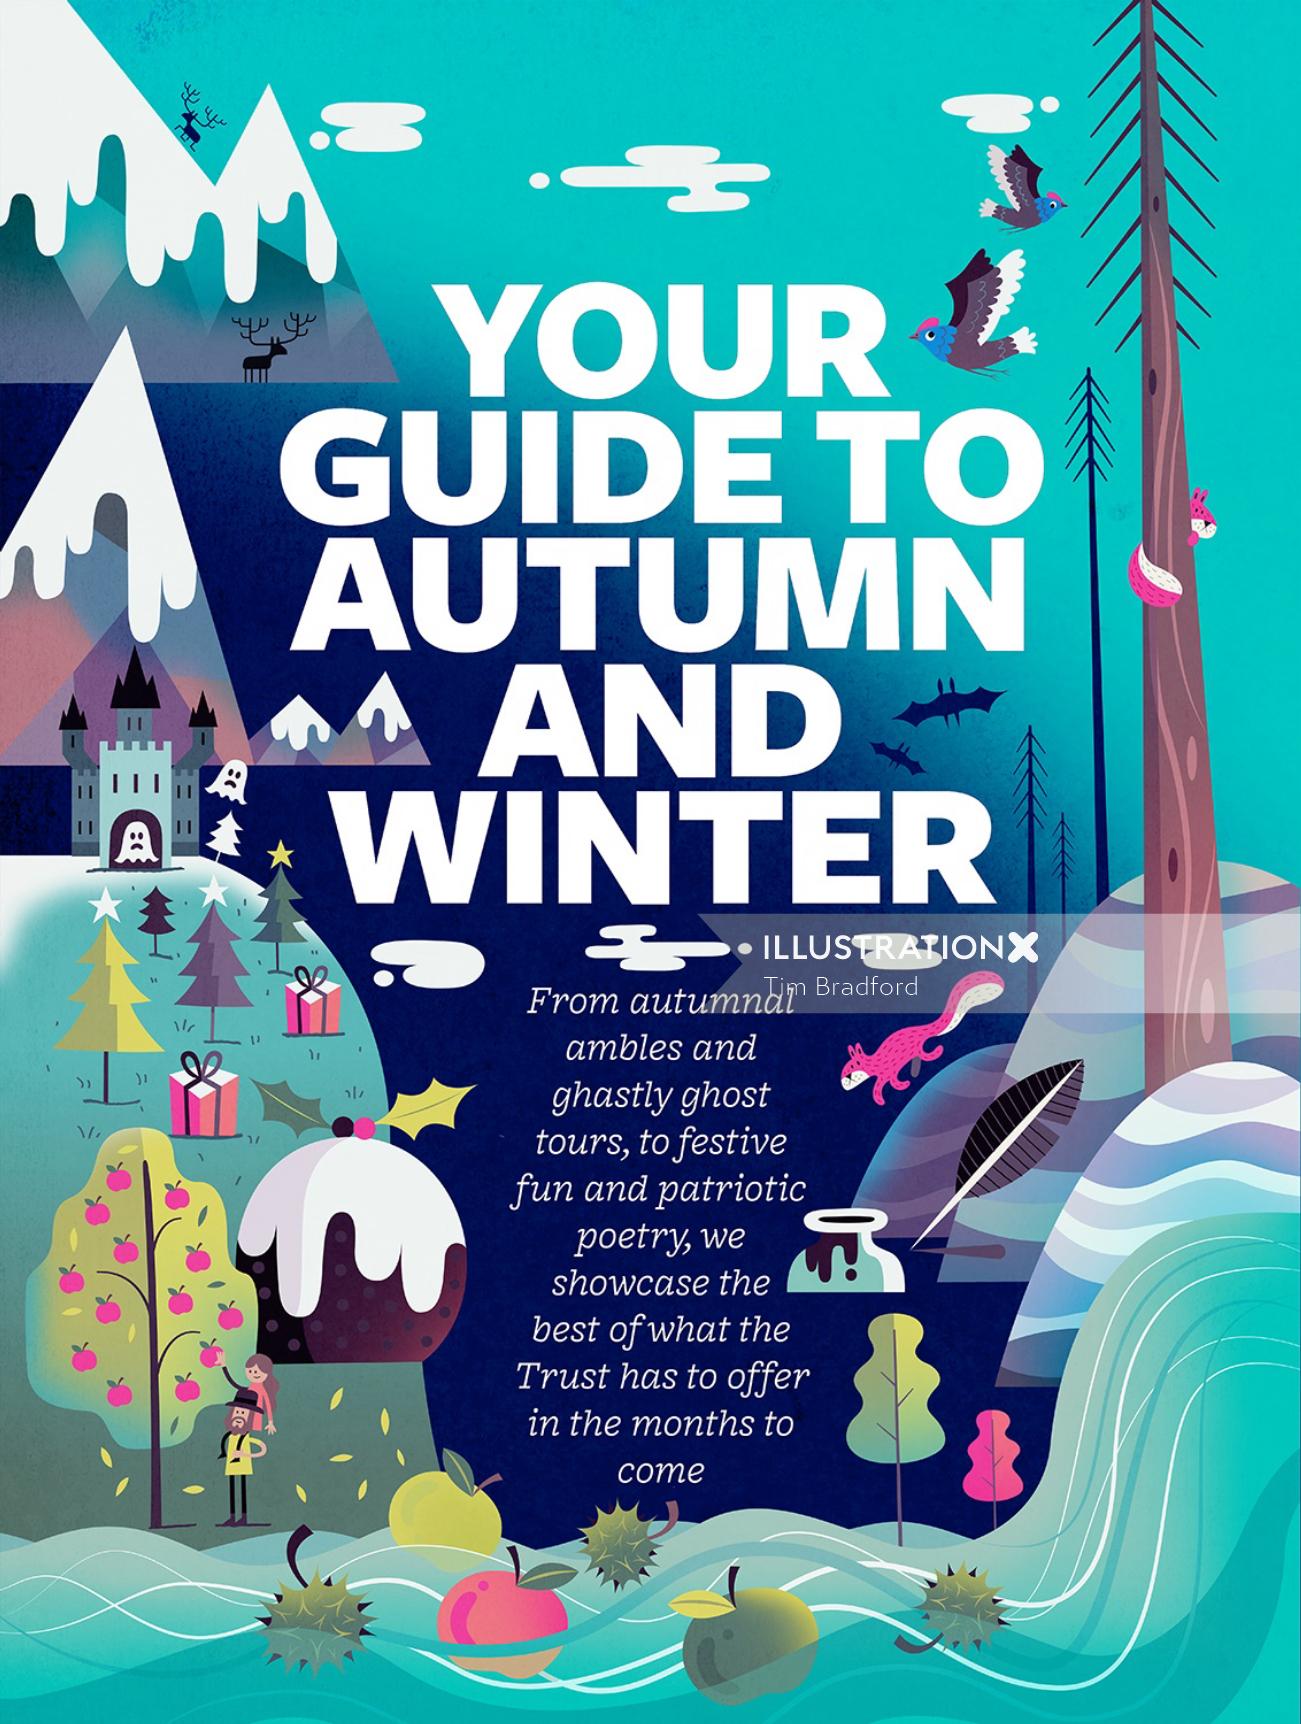 Graphic Your guide to auntumn and winter
